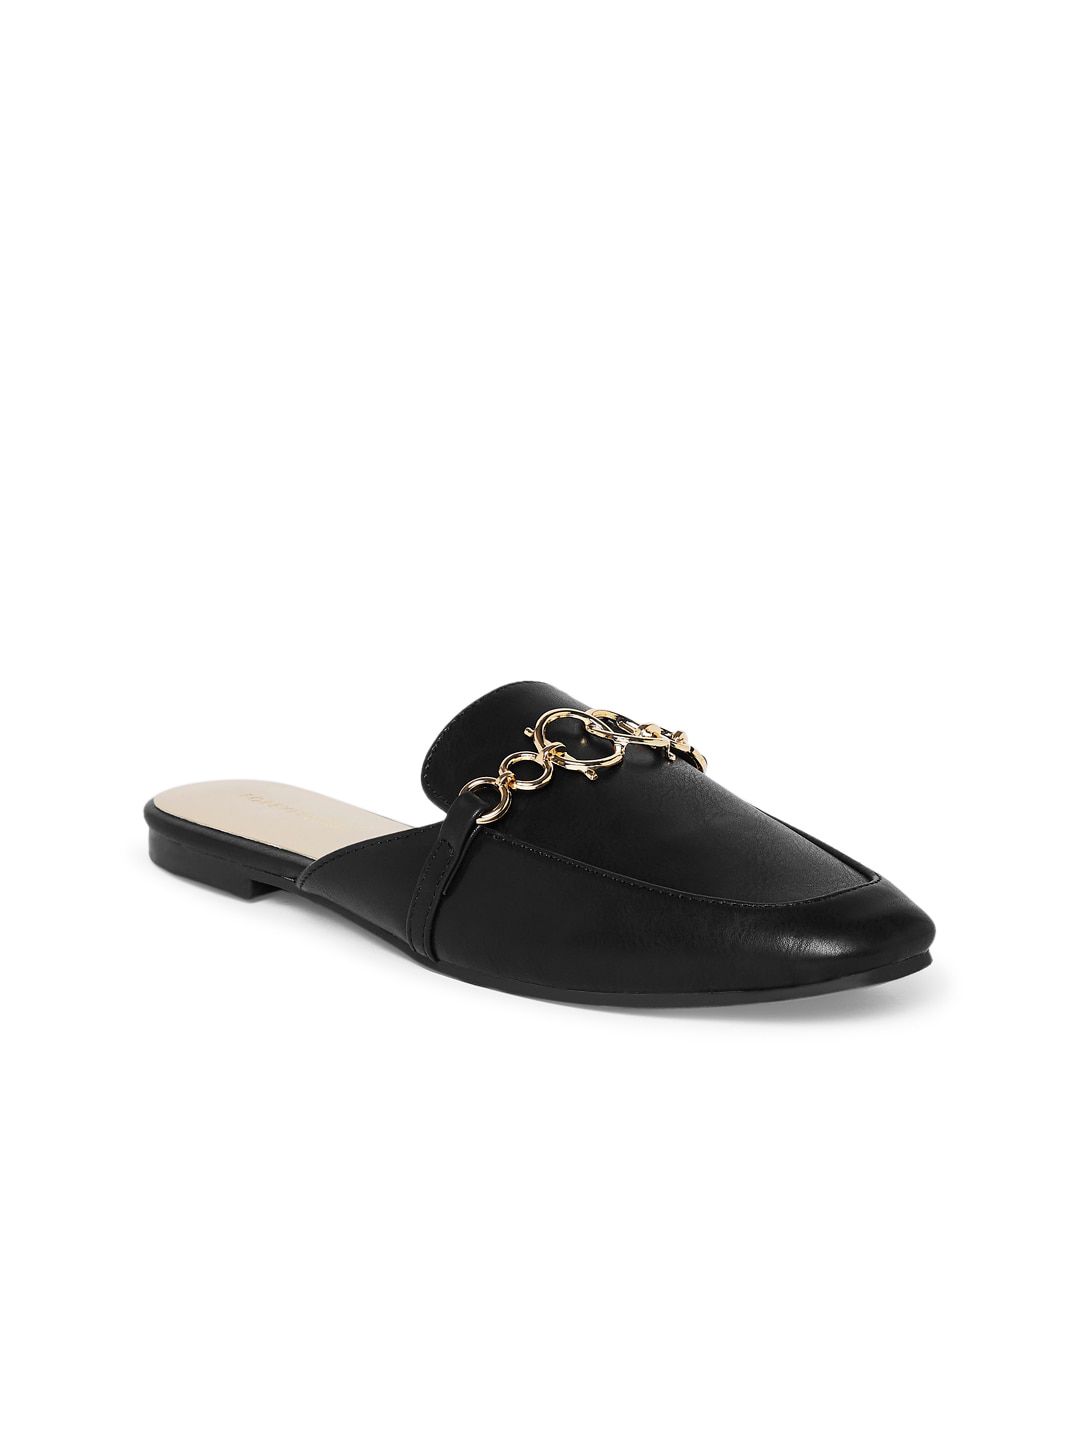 Forever Glam by Pantaloons Women Black Embellished Mules with Buckles Flats Price in India